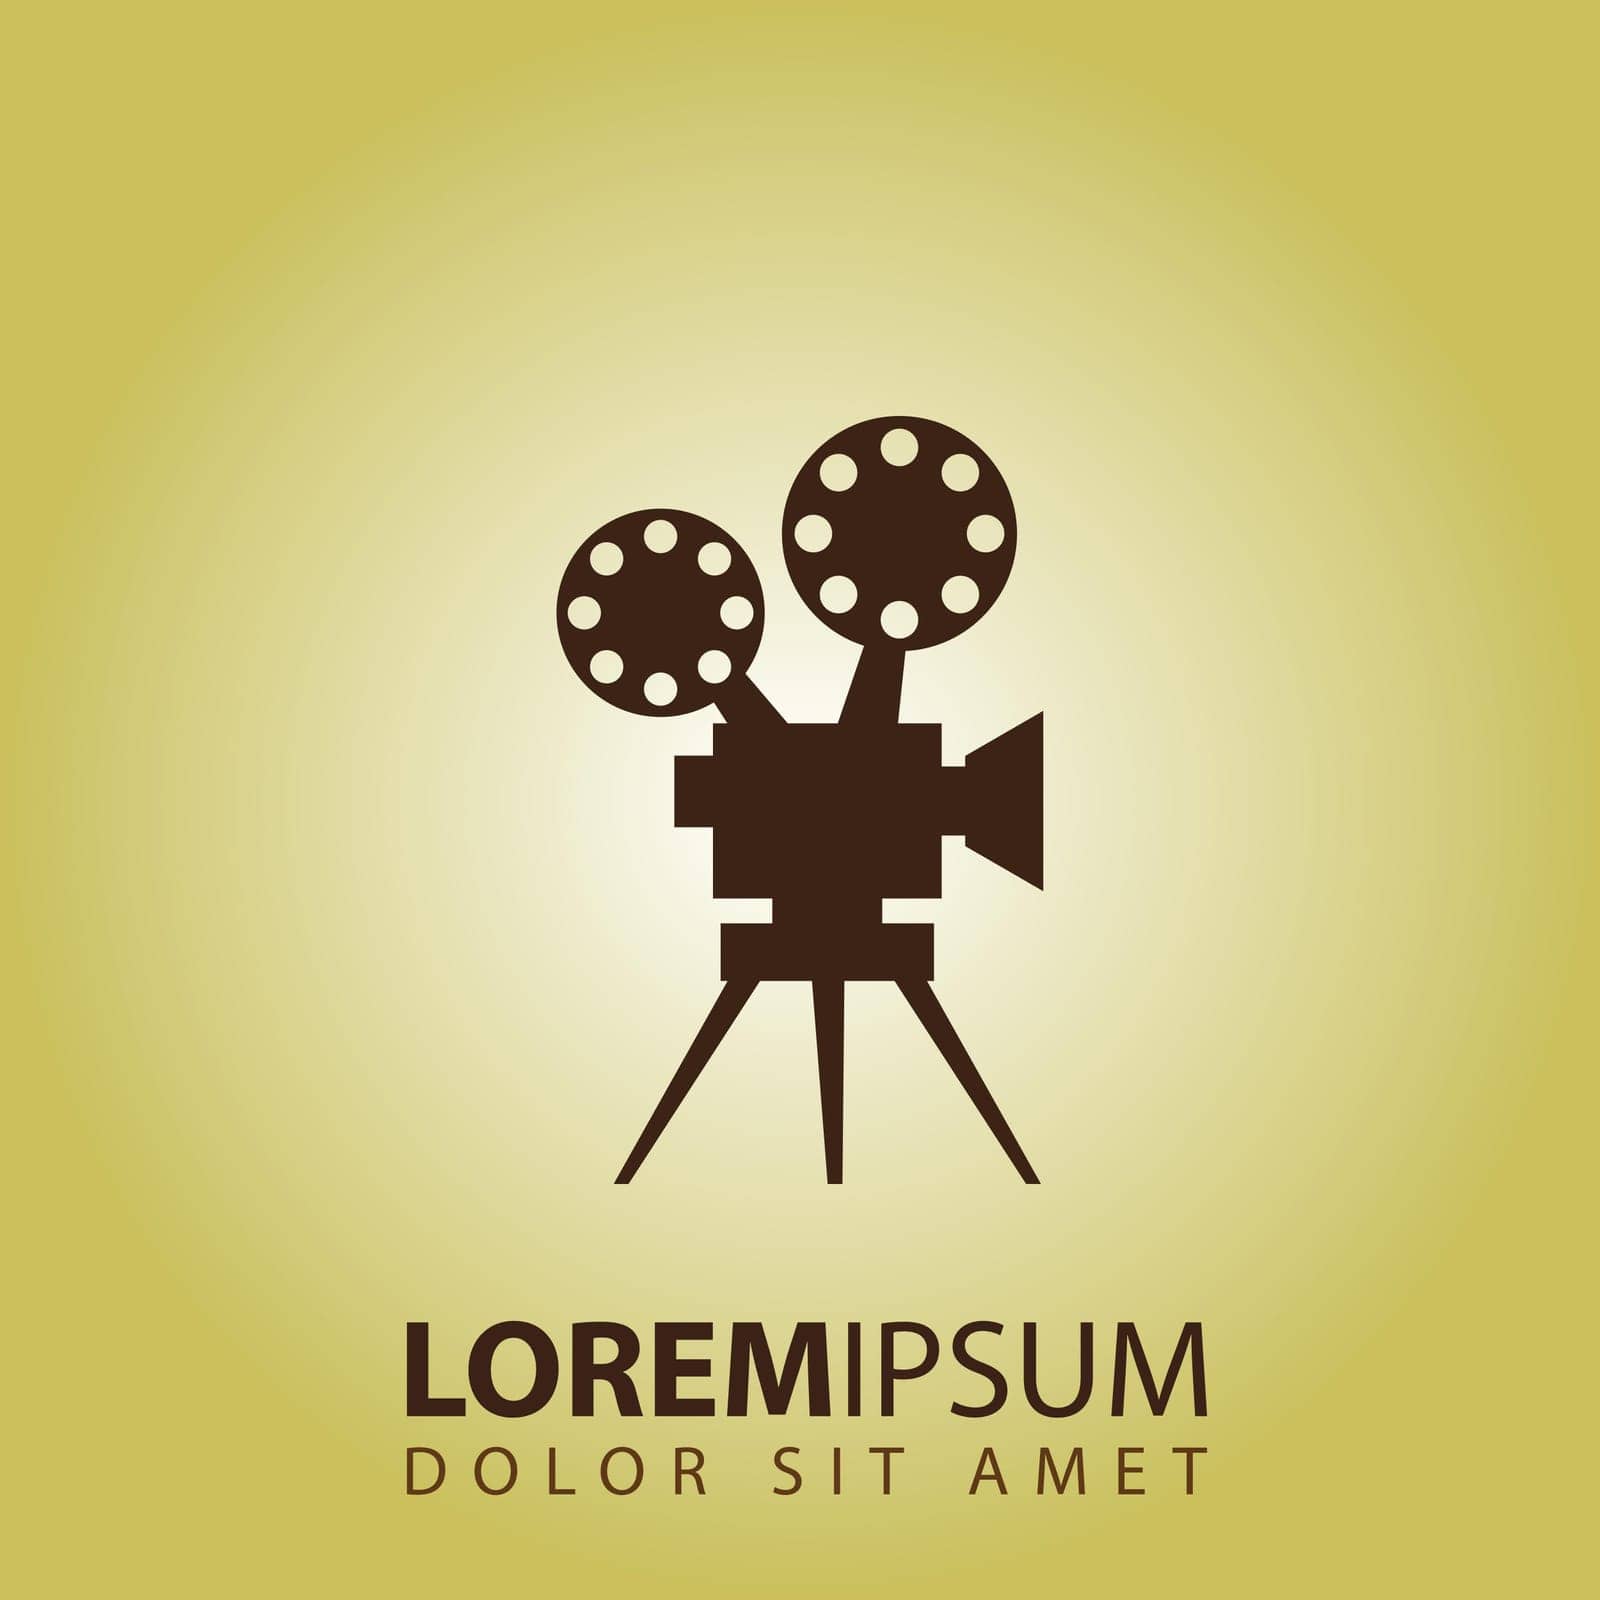 broadcast,symbol,tv,movie,production,icon,isolated,recording,simple,industry,video,media,camcorder,button,signs,white,modern,web,projector,design,vector,cinema,camera,communication,filmstrip,old,television,black,retro,photo,film,technology,picture,reel,single,square,multimedia,round,elements,illustration,internet by ogqcorp